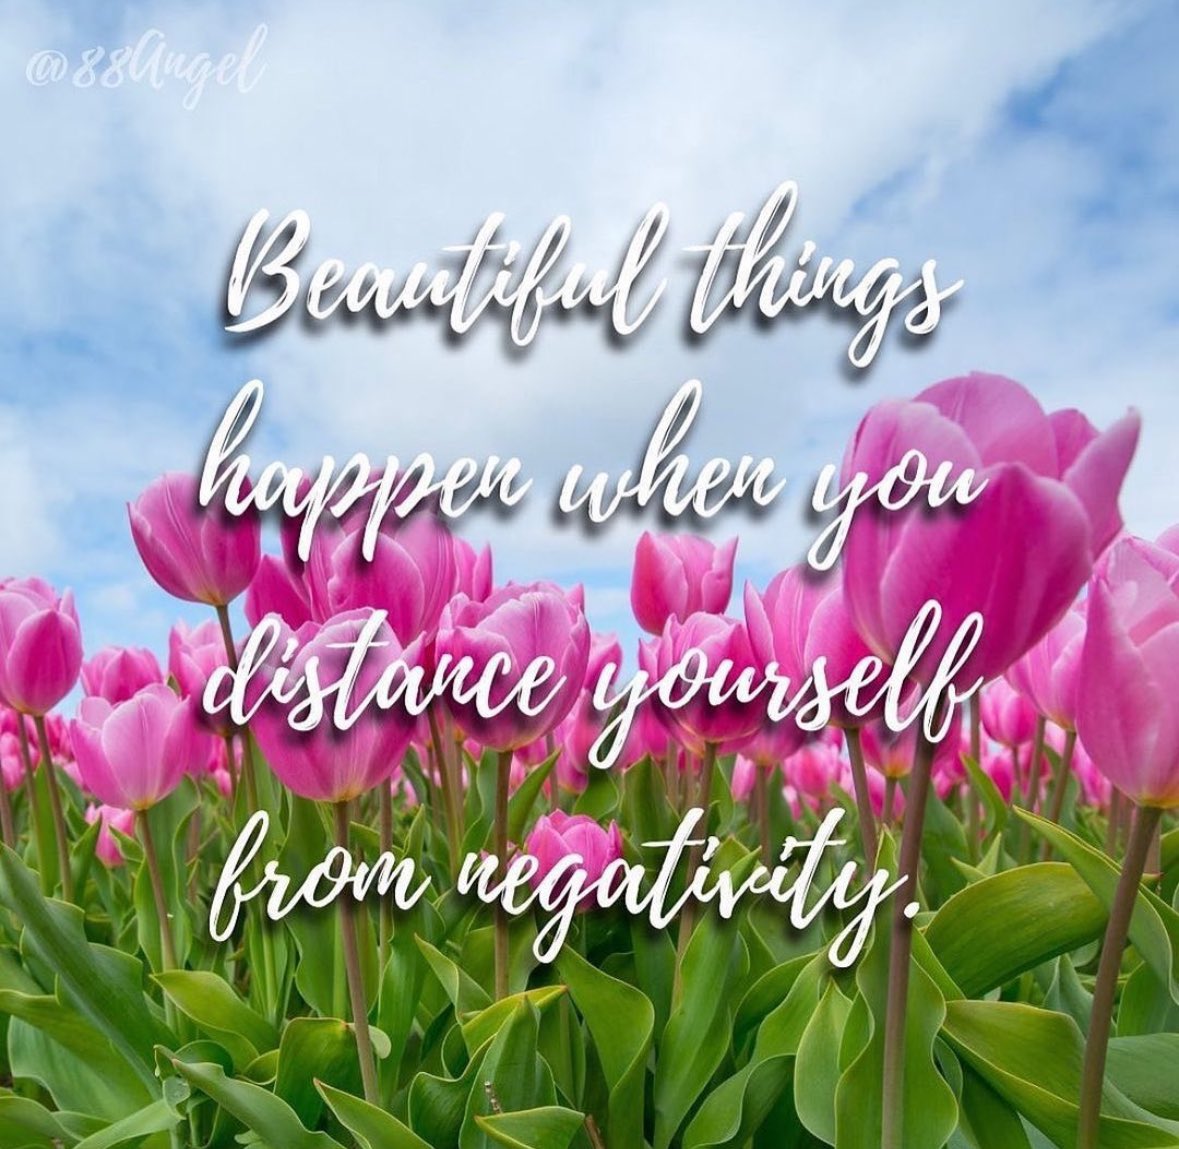 Beautiful things happen when you distance yourself from negativity. #fridaymorning #fridaydaymotivation #FridayFeeIing #fridaymood #friday #motivation #quotes #quote #Inspiration #inspirationalquotes #inspirational